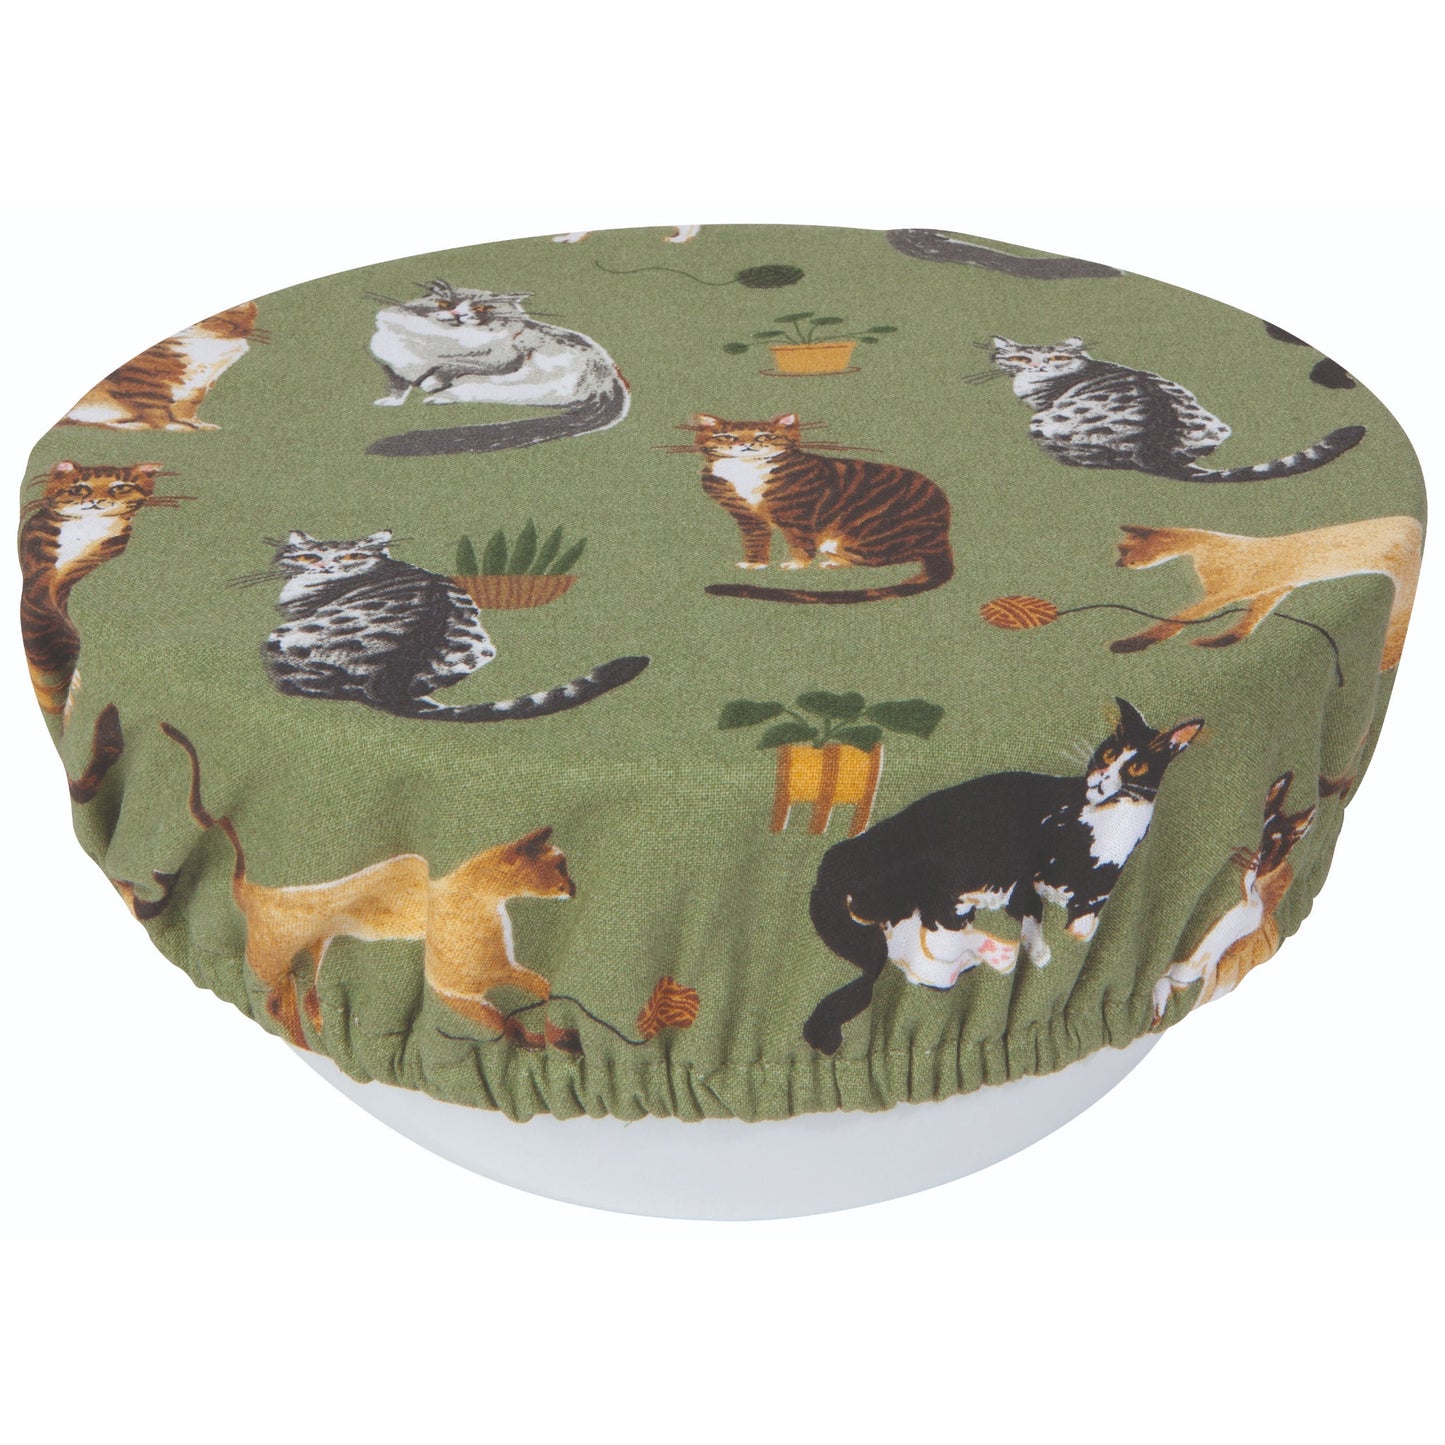 "Cat Collective": Bowl Covers (Set of 2) - Tiny Tiger Gift Shop